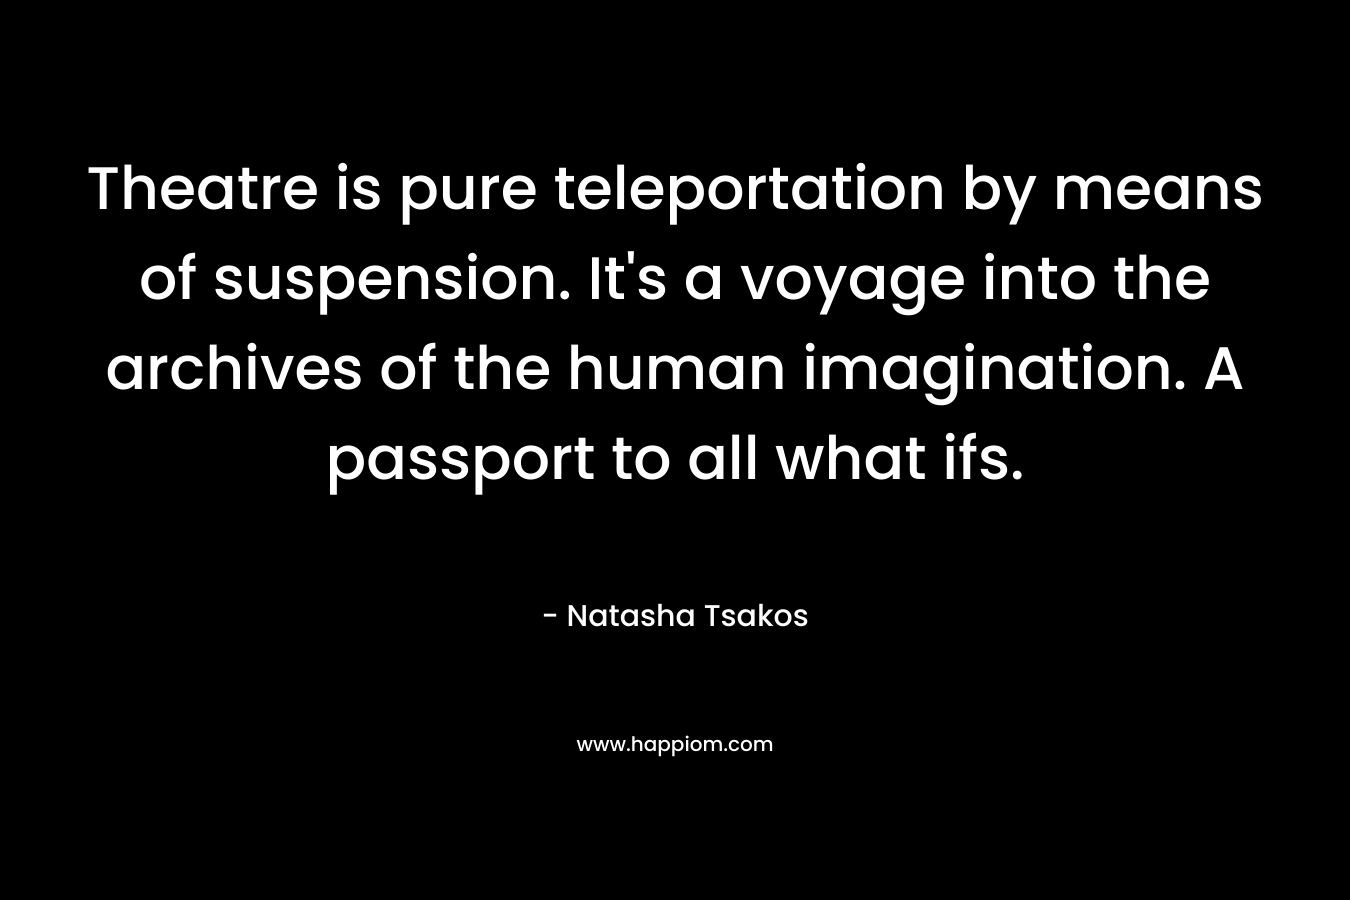 Theatre is pure teleportation by means of suspension. It’s a voyage into the archives of the human imagination. A passport to all what ifs. – Natasha Tsakos